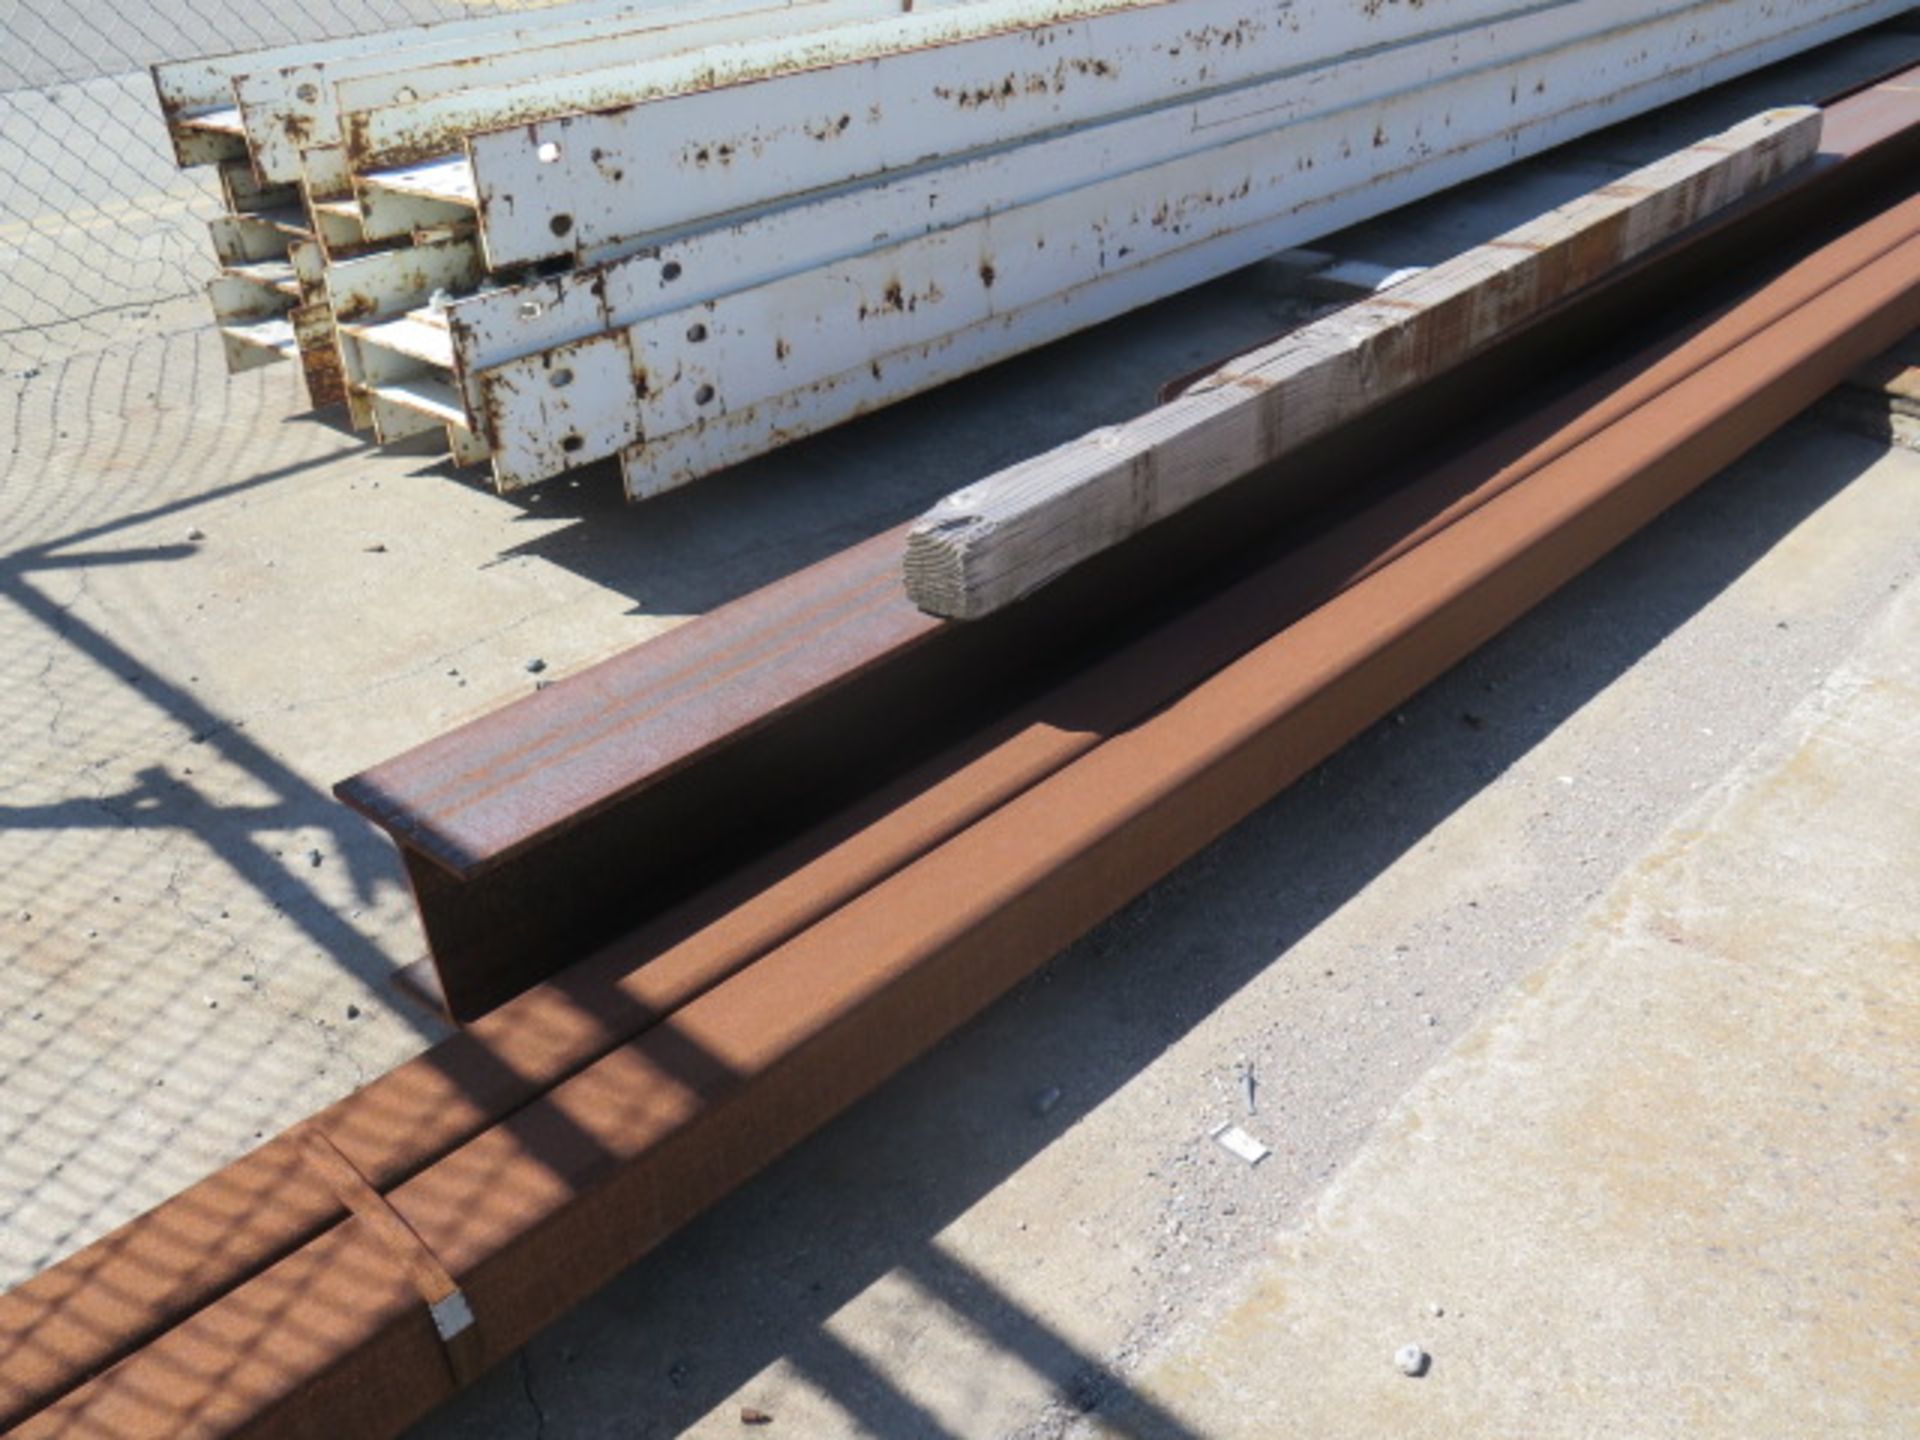 Raw Materials H-Beam, I-Beam, Channel, Square and Round Tubing, Angle and Galvanized Grating (SOLD - Image 4 of 22